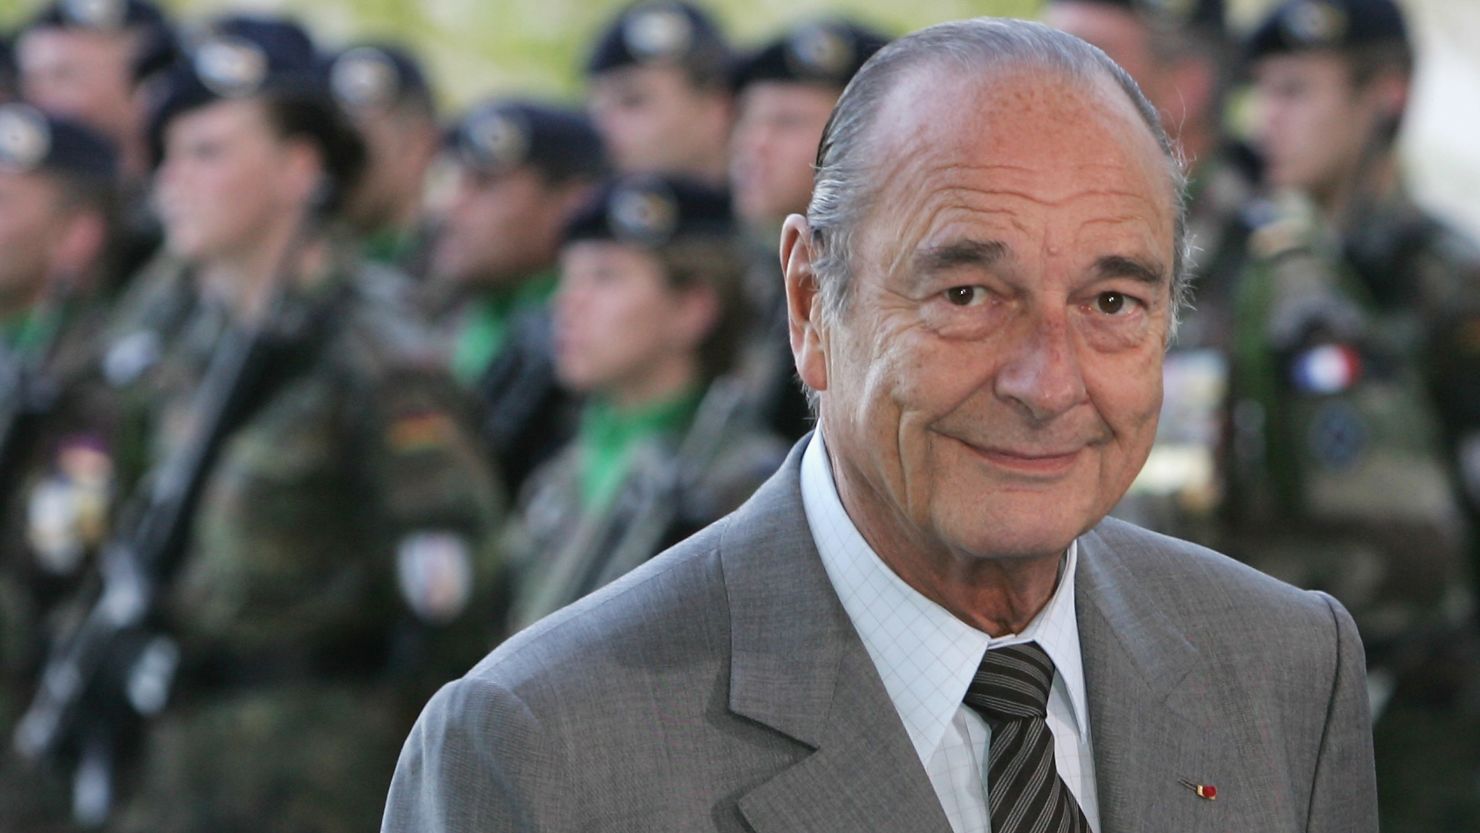 Jacques Chirac served as the French president from 1995 to 2007.